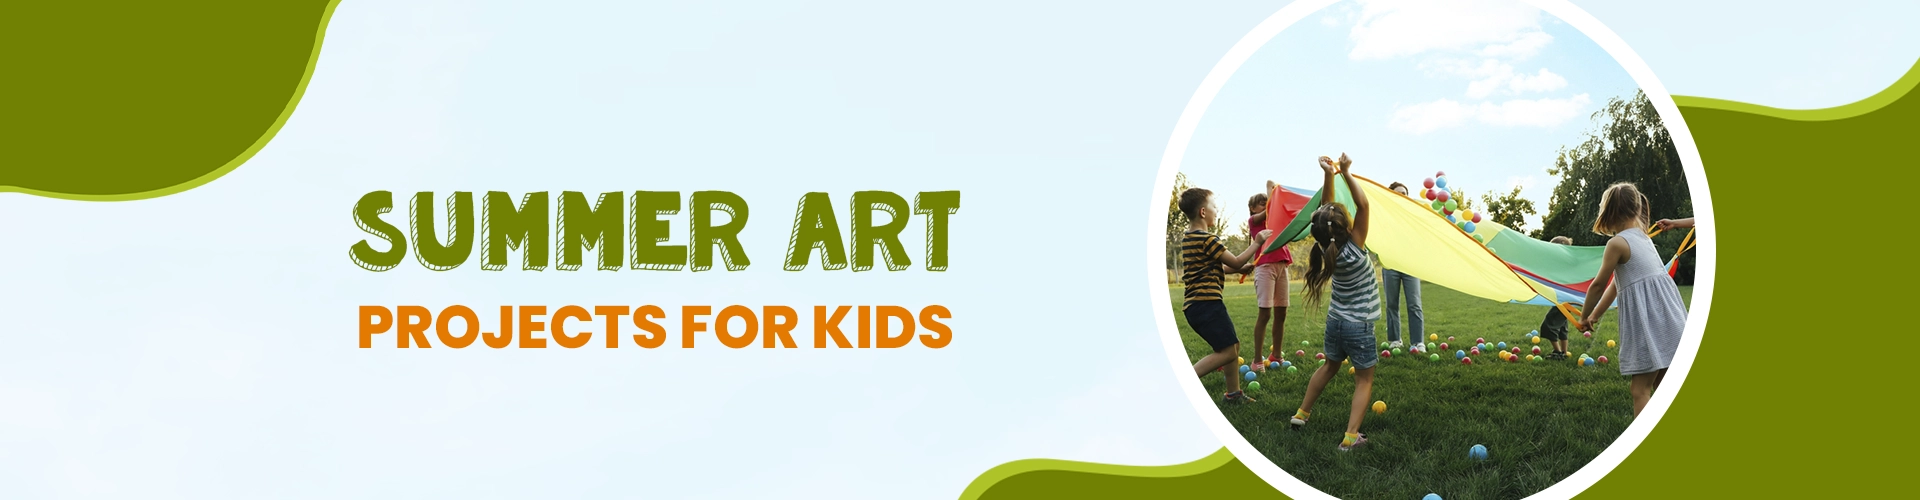 Summer Art Projects For Kids